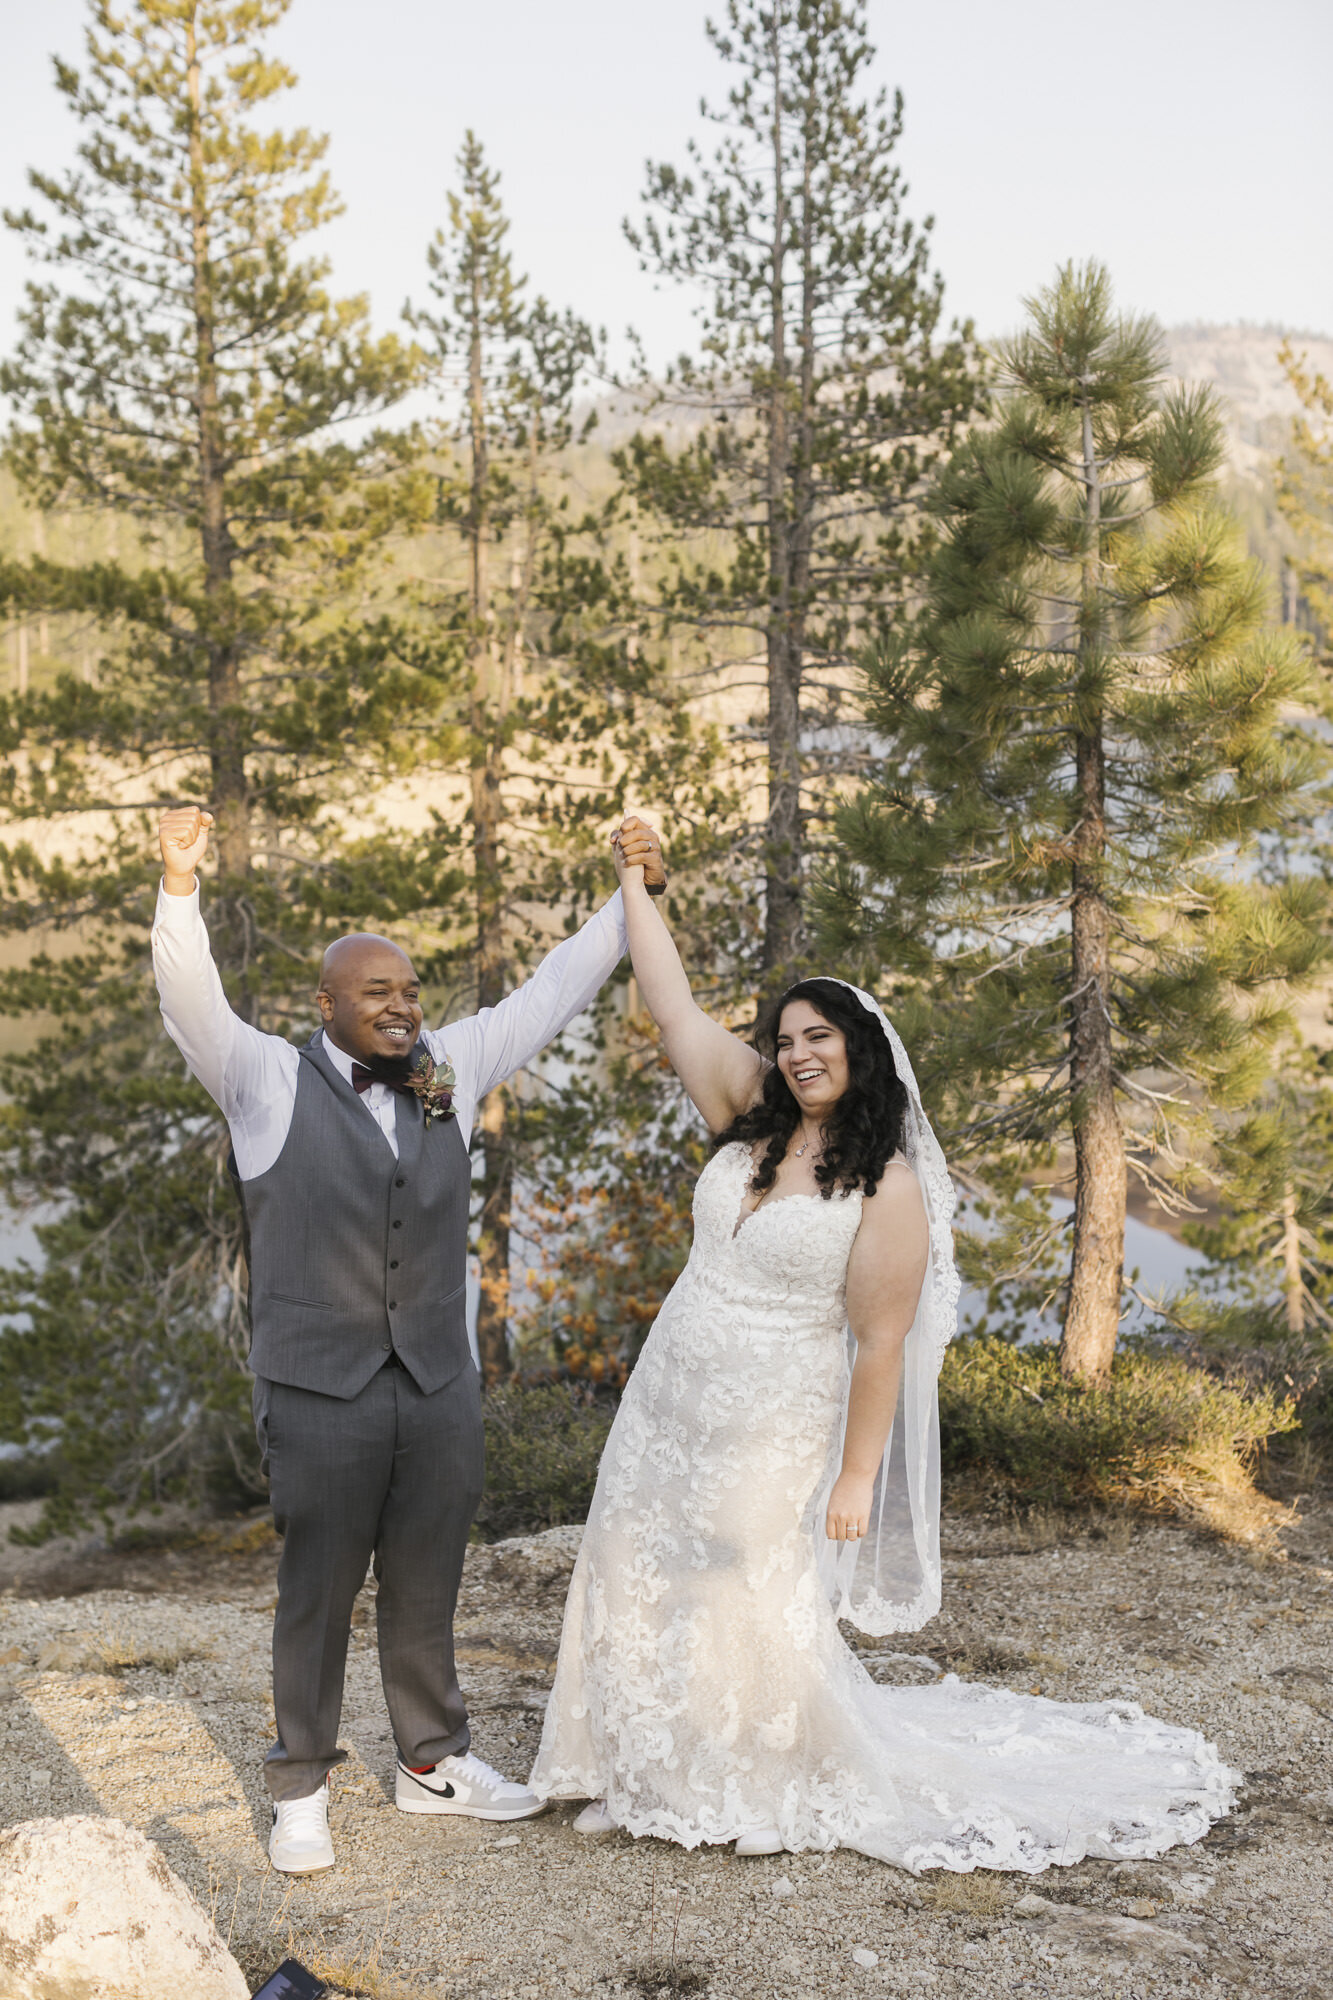 Bride and groom raise their arms in celebration after getting married in the Tahoe forest